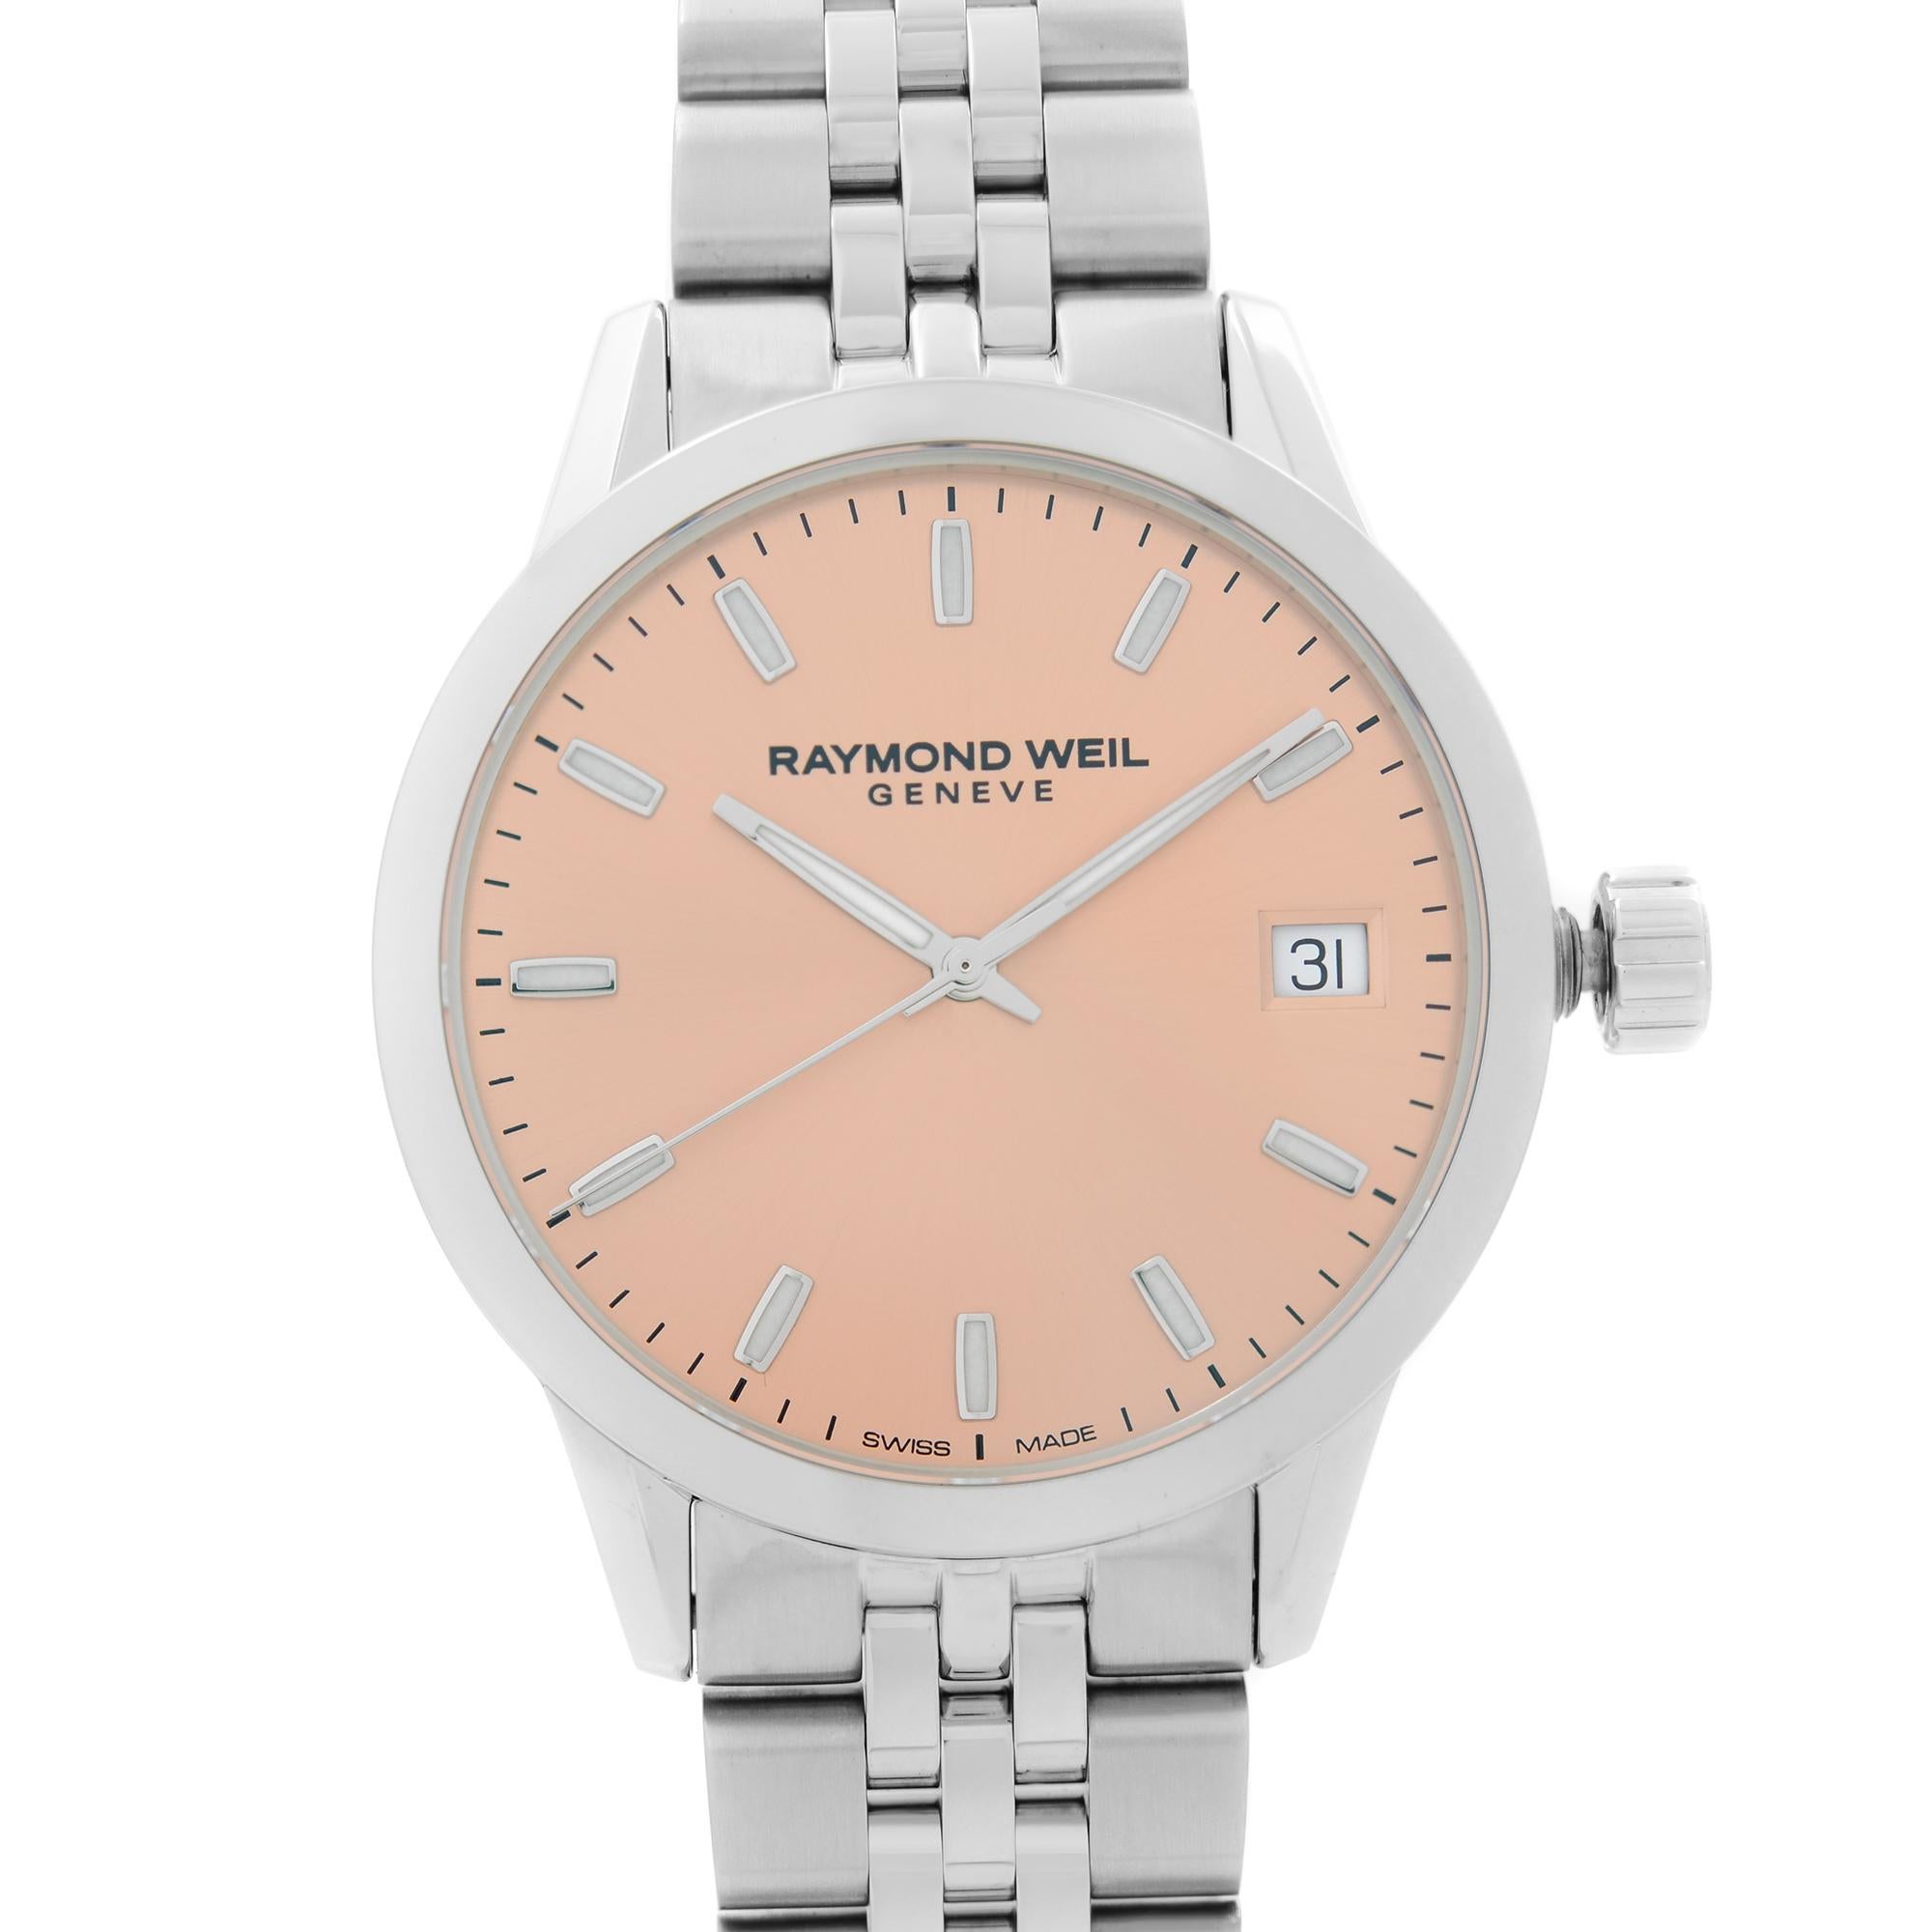 Never Worn Raymond Weil Freelancer Steel Rose Dial Quartz Ladies Watch 5634-ST-80021. This Beautiful Timepiece Features: Stainless Steel Case and Bracelet, Fixed Stainless Steel Bezel, Rose Dial with Luminous Silver-Tone Hands, And Index Hour